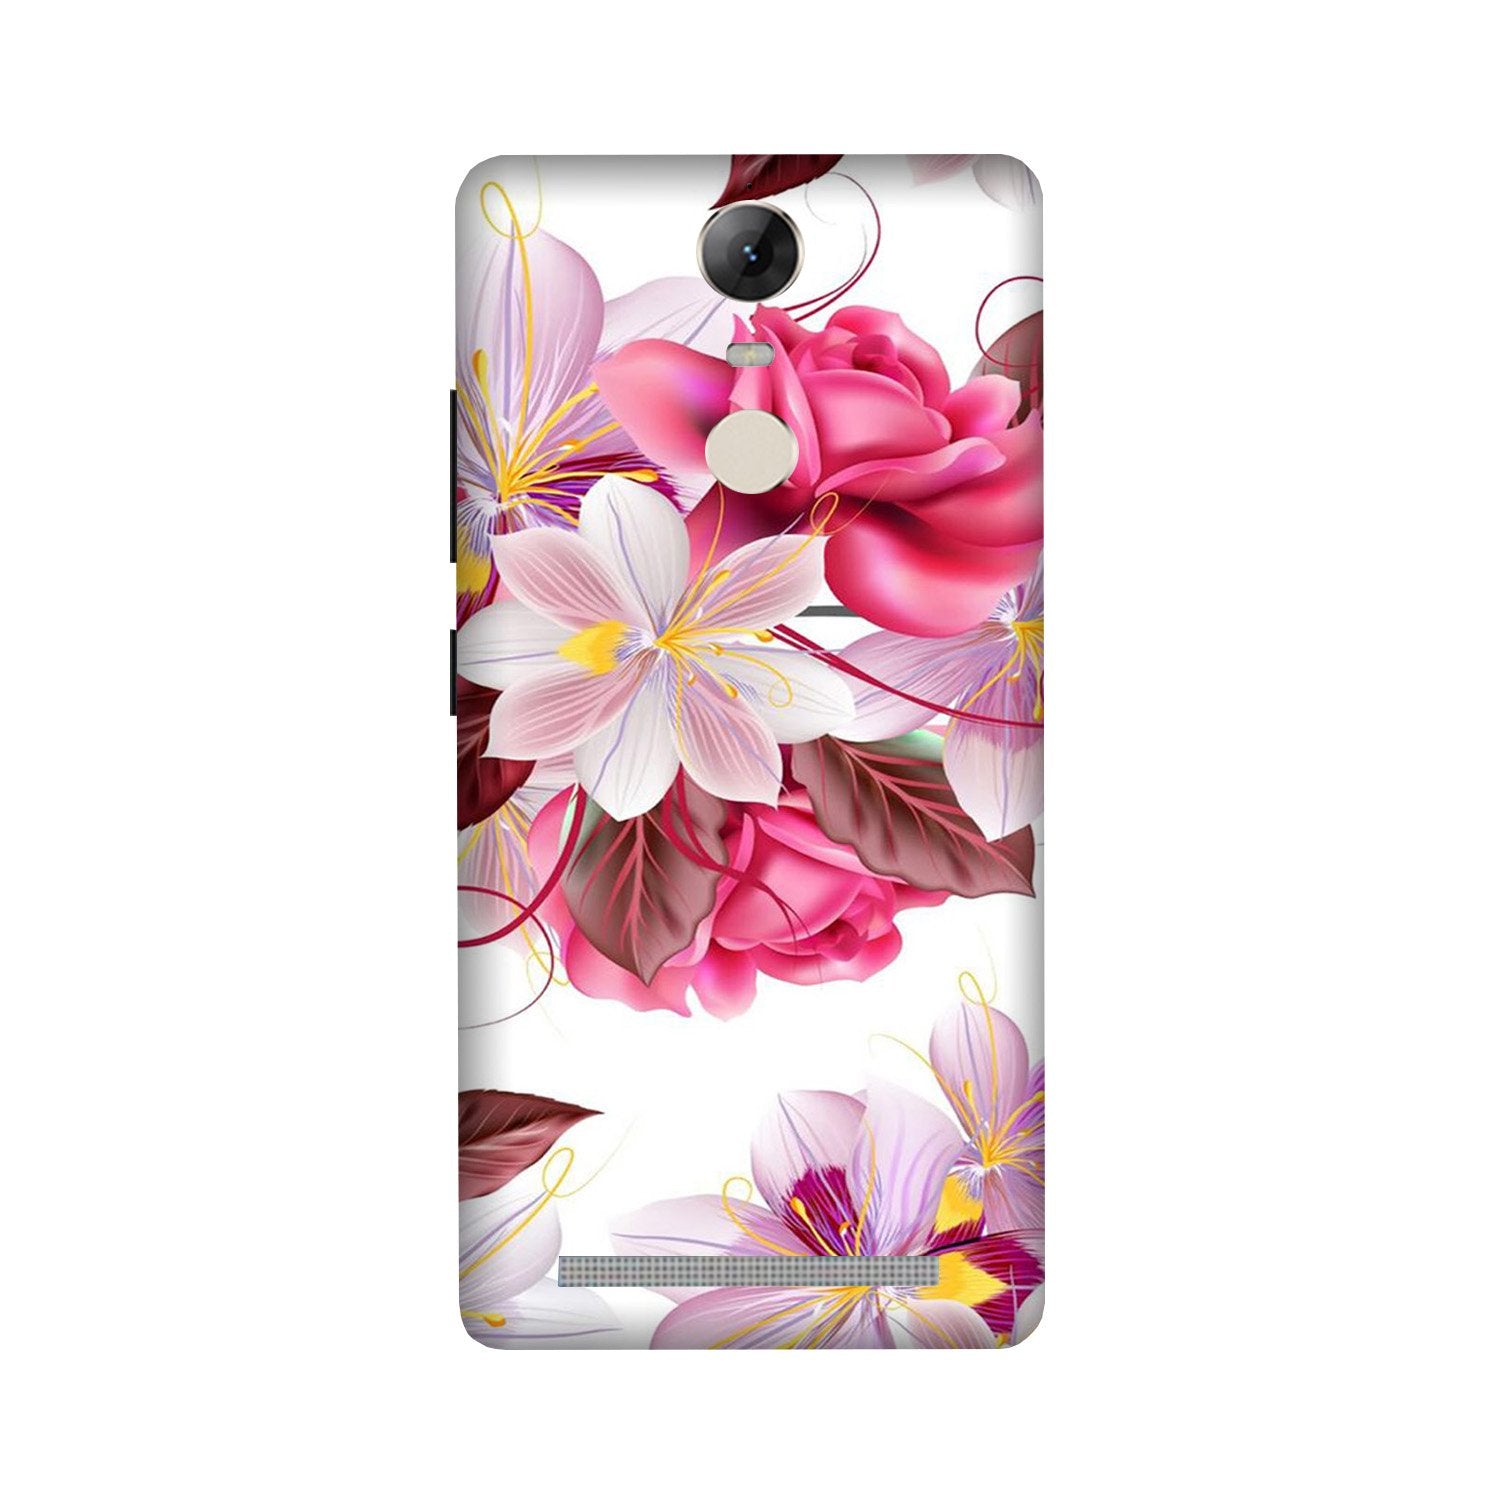 Beautiful flowers Case for Lenovo Vibe K5 Note